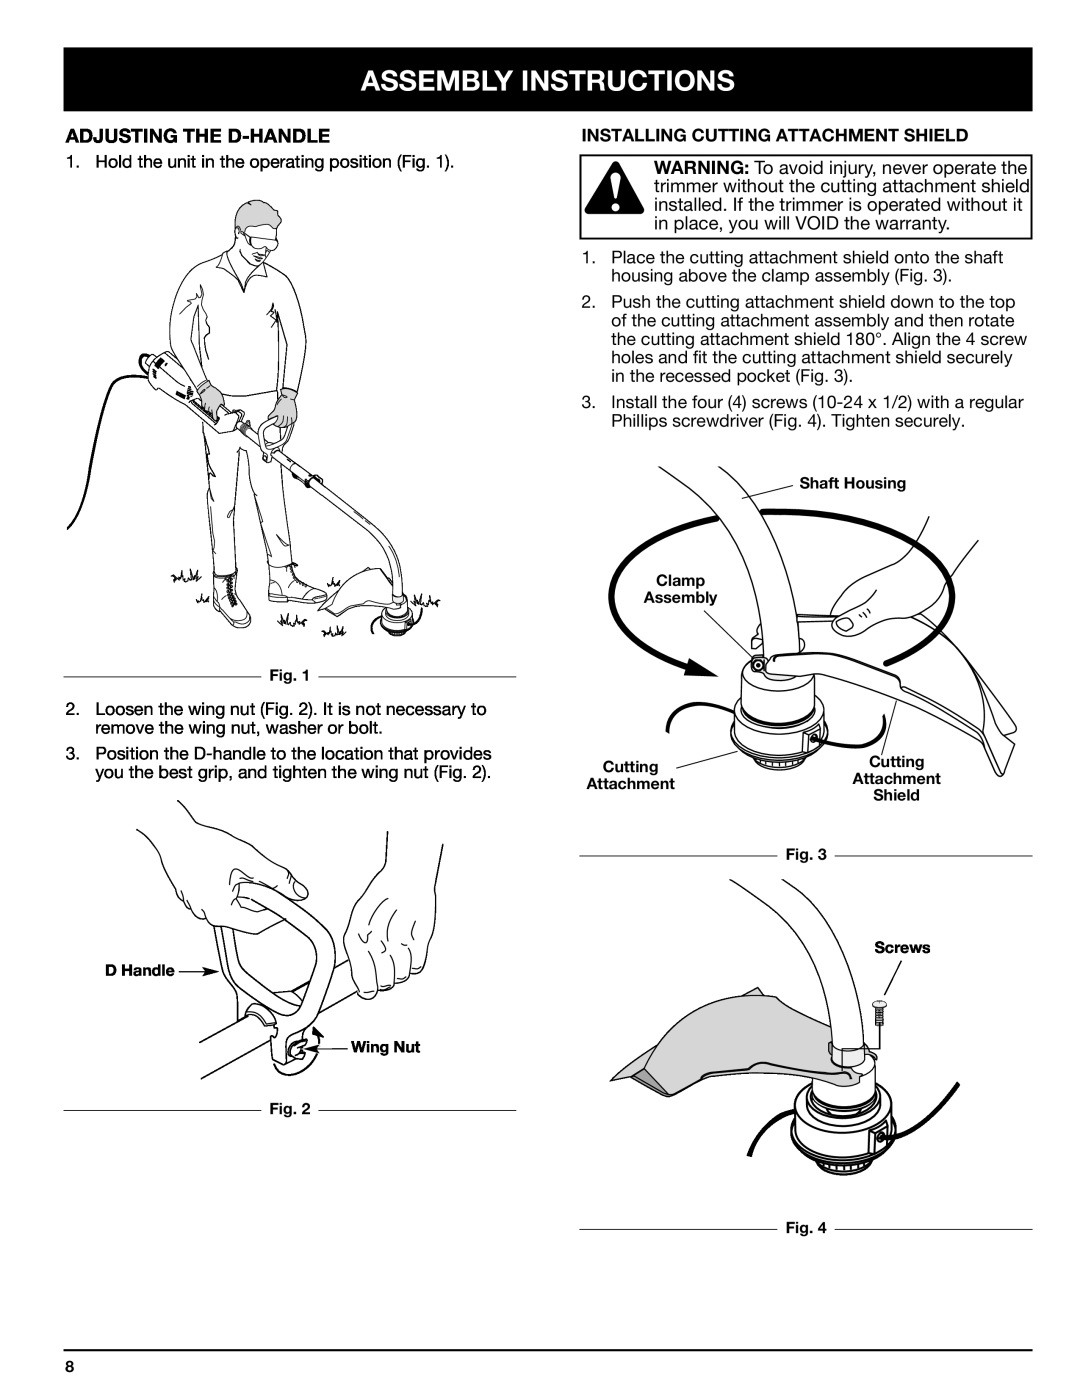 Ryobi 130rEB manual Assembly Instructions, Adjusting The D-Handle, Installing Cutting Attachment Shield 